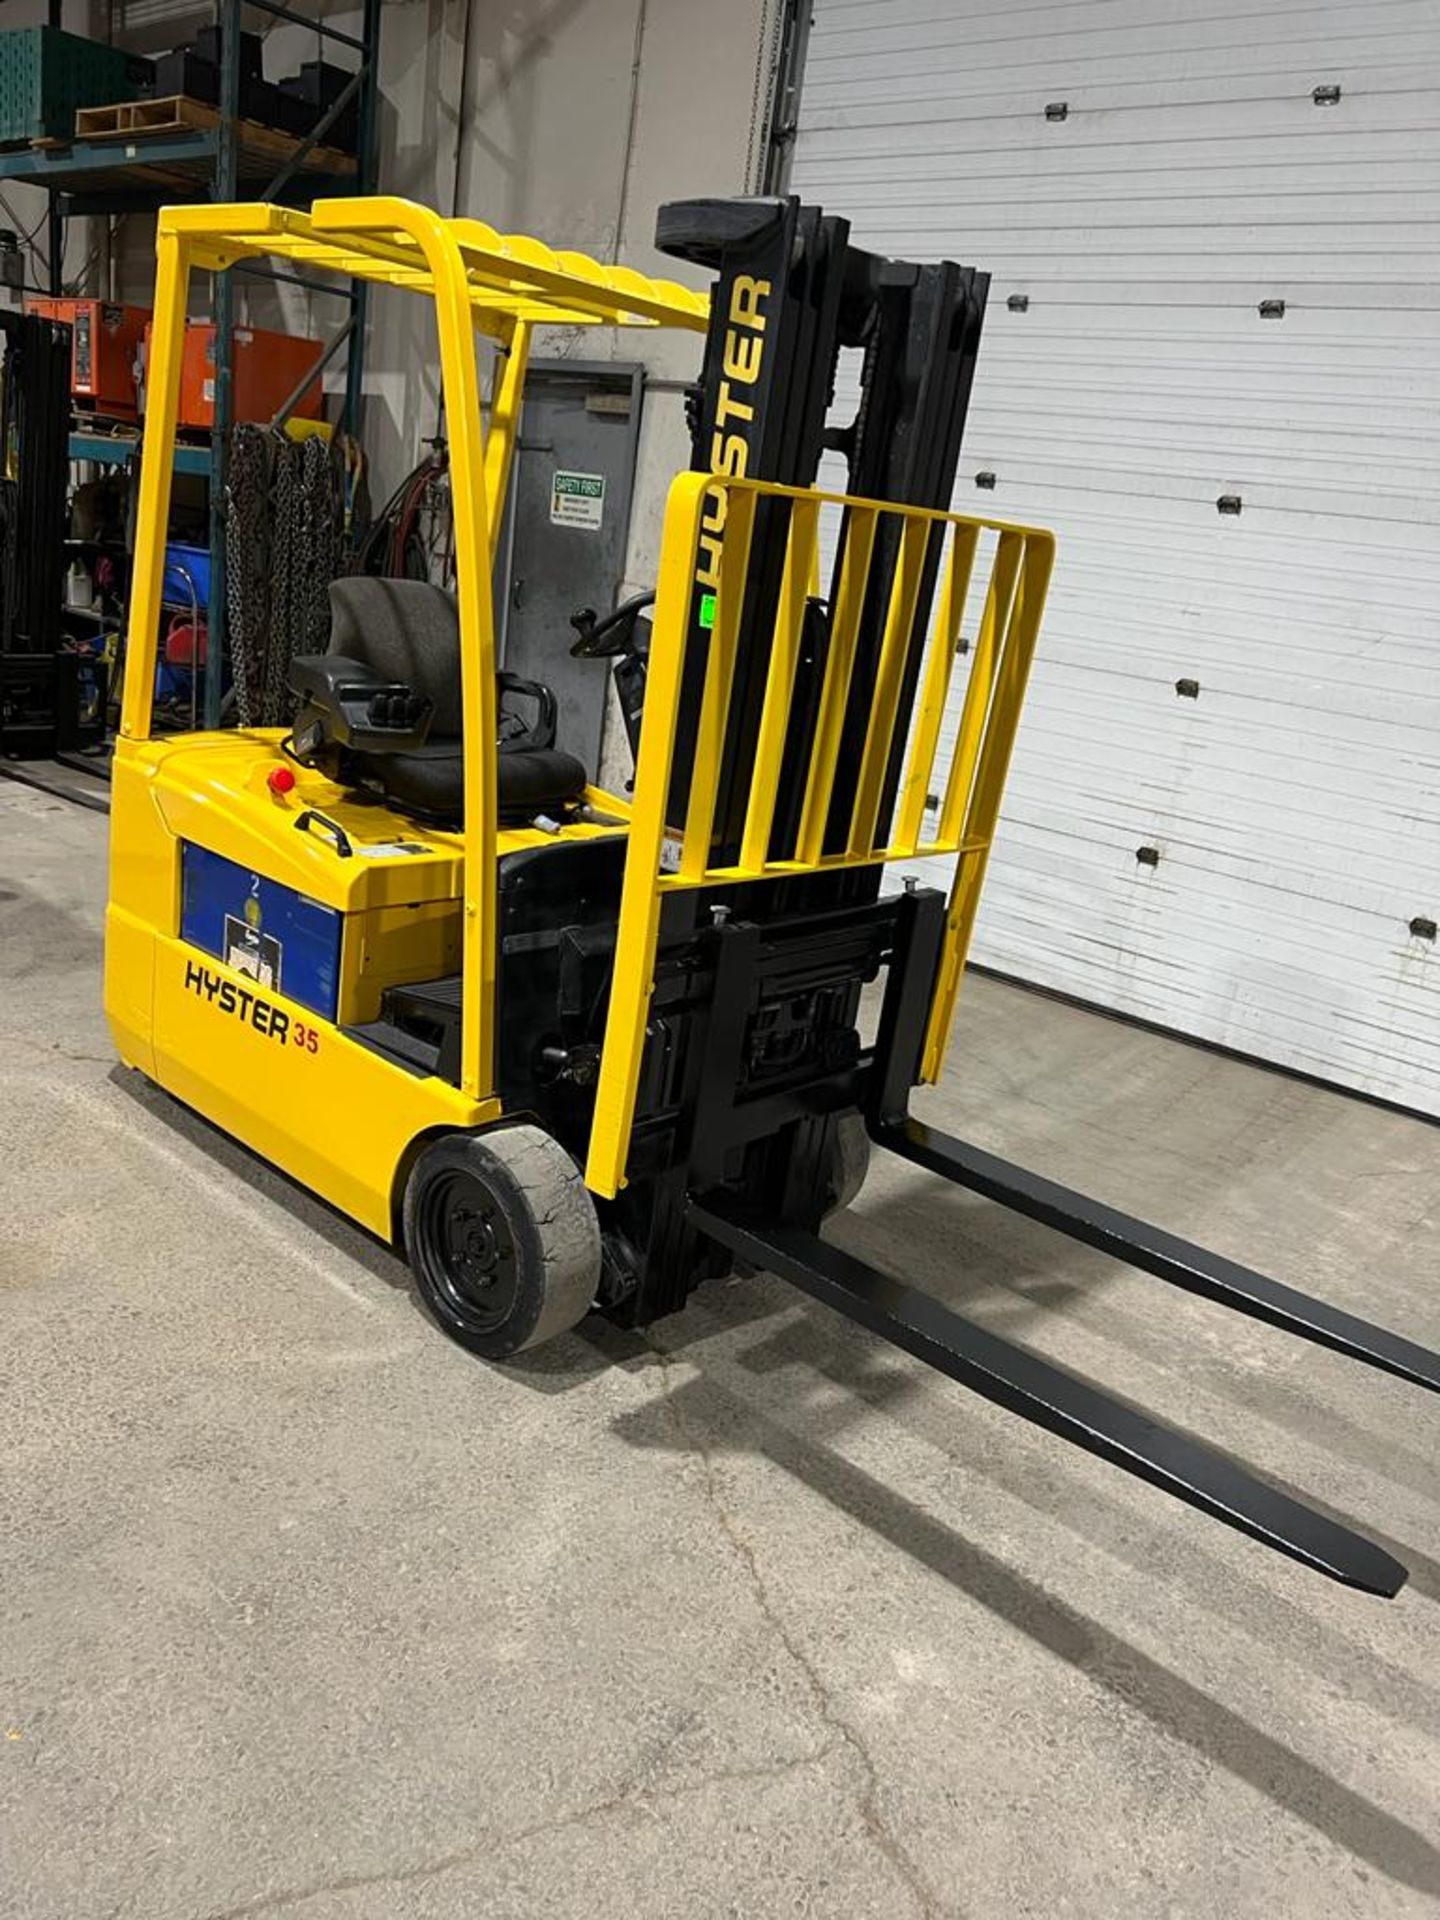 NICE Hyster 3,500lbs Capacity 3-Wheel Electric Forklift with sideshift & 36V 3-stage mast with LOW - Image 2 of 4